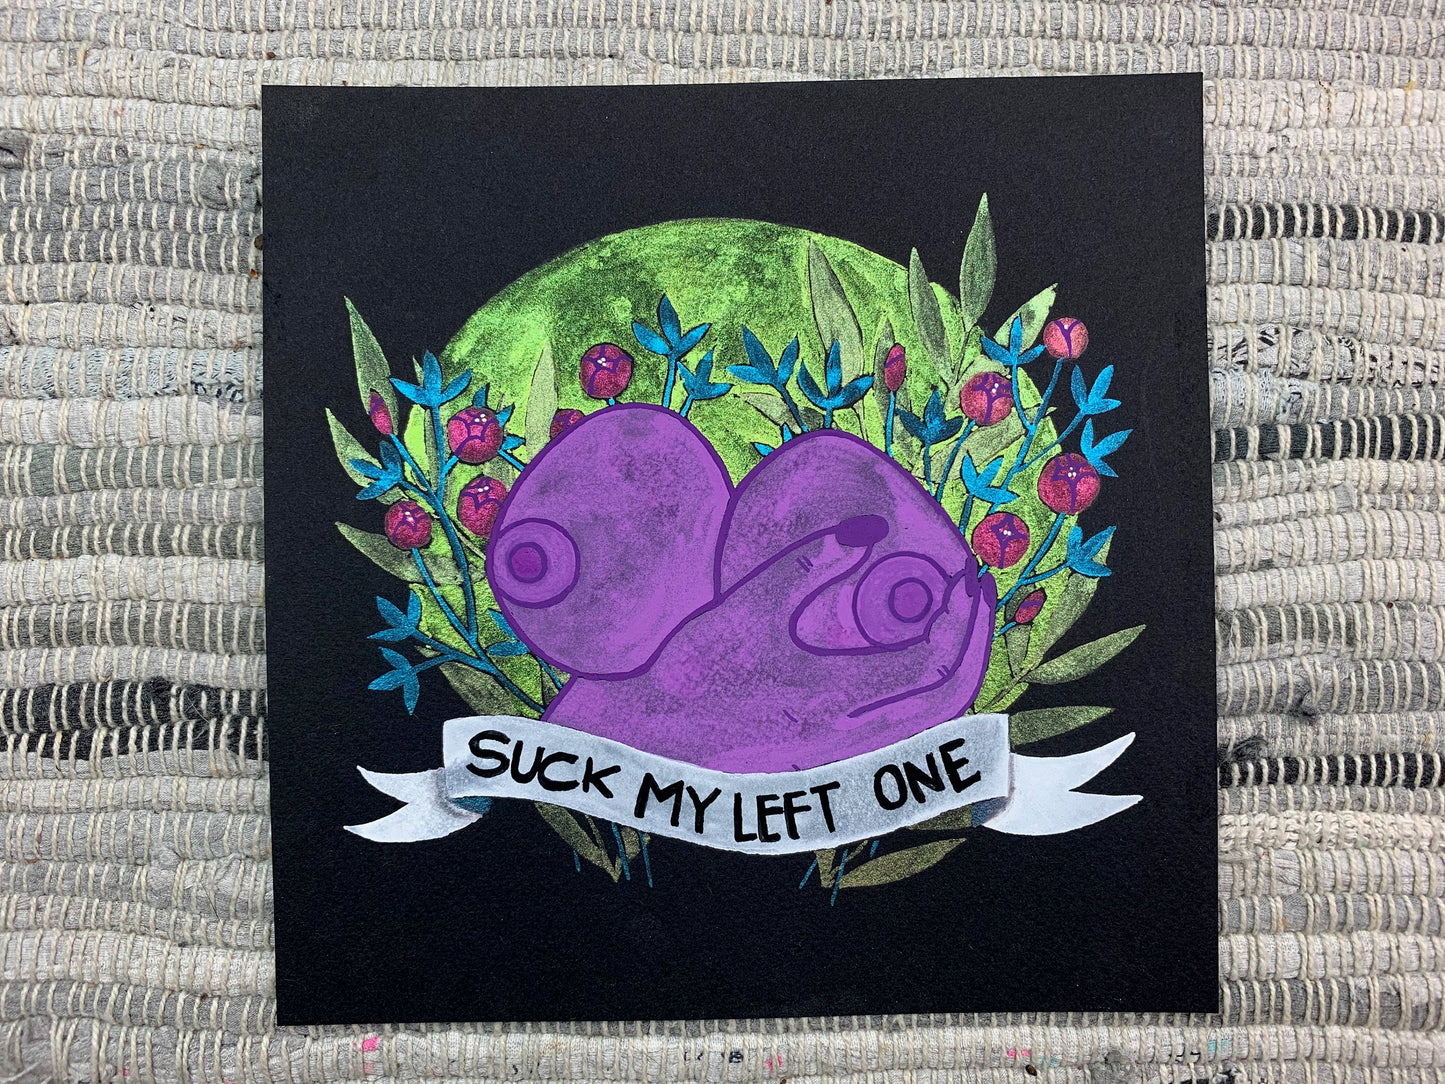 A painting of a pair of breasts and a hand holding one of them with a bouquet of color shifting flowers behind it and a banner that says "Suck my left one" in front.